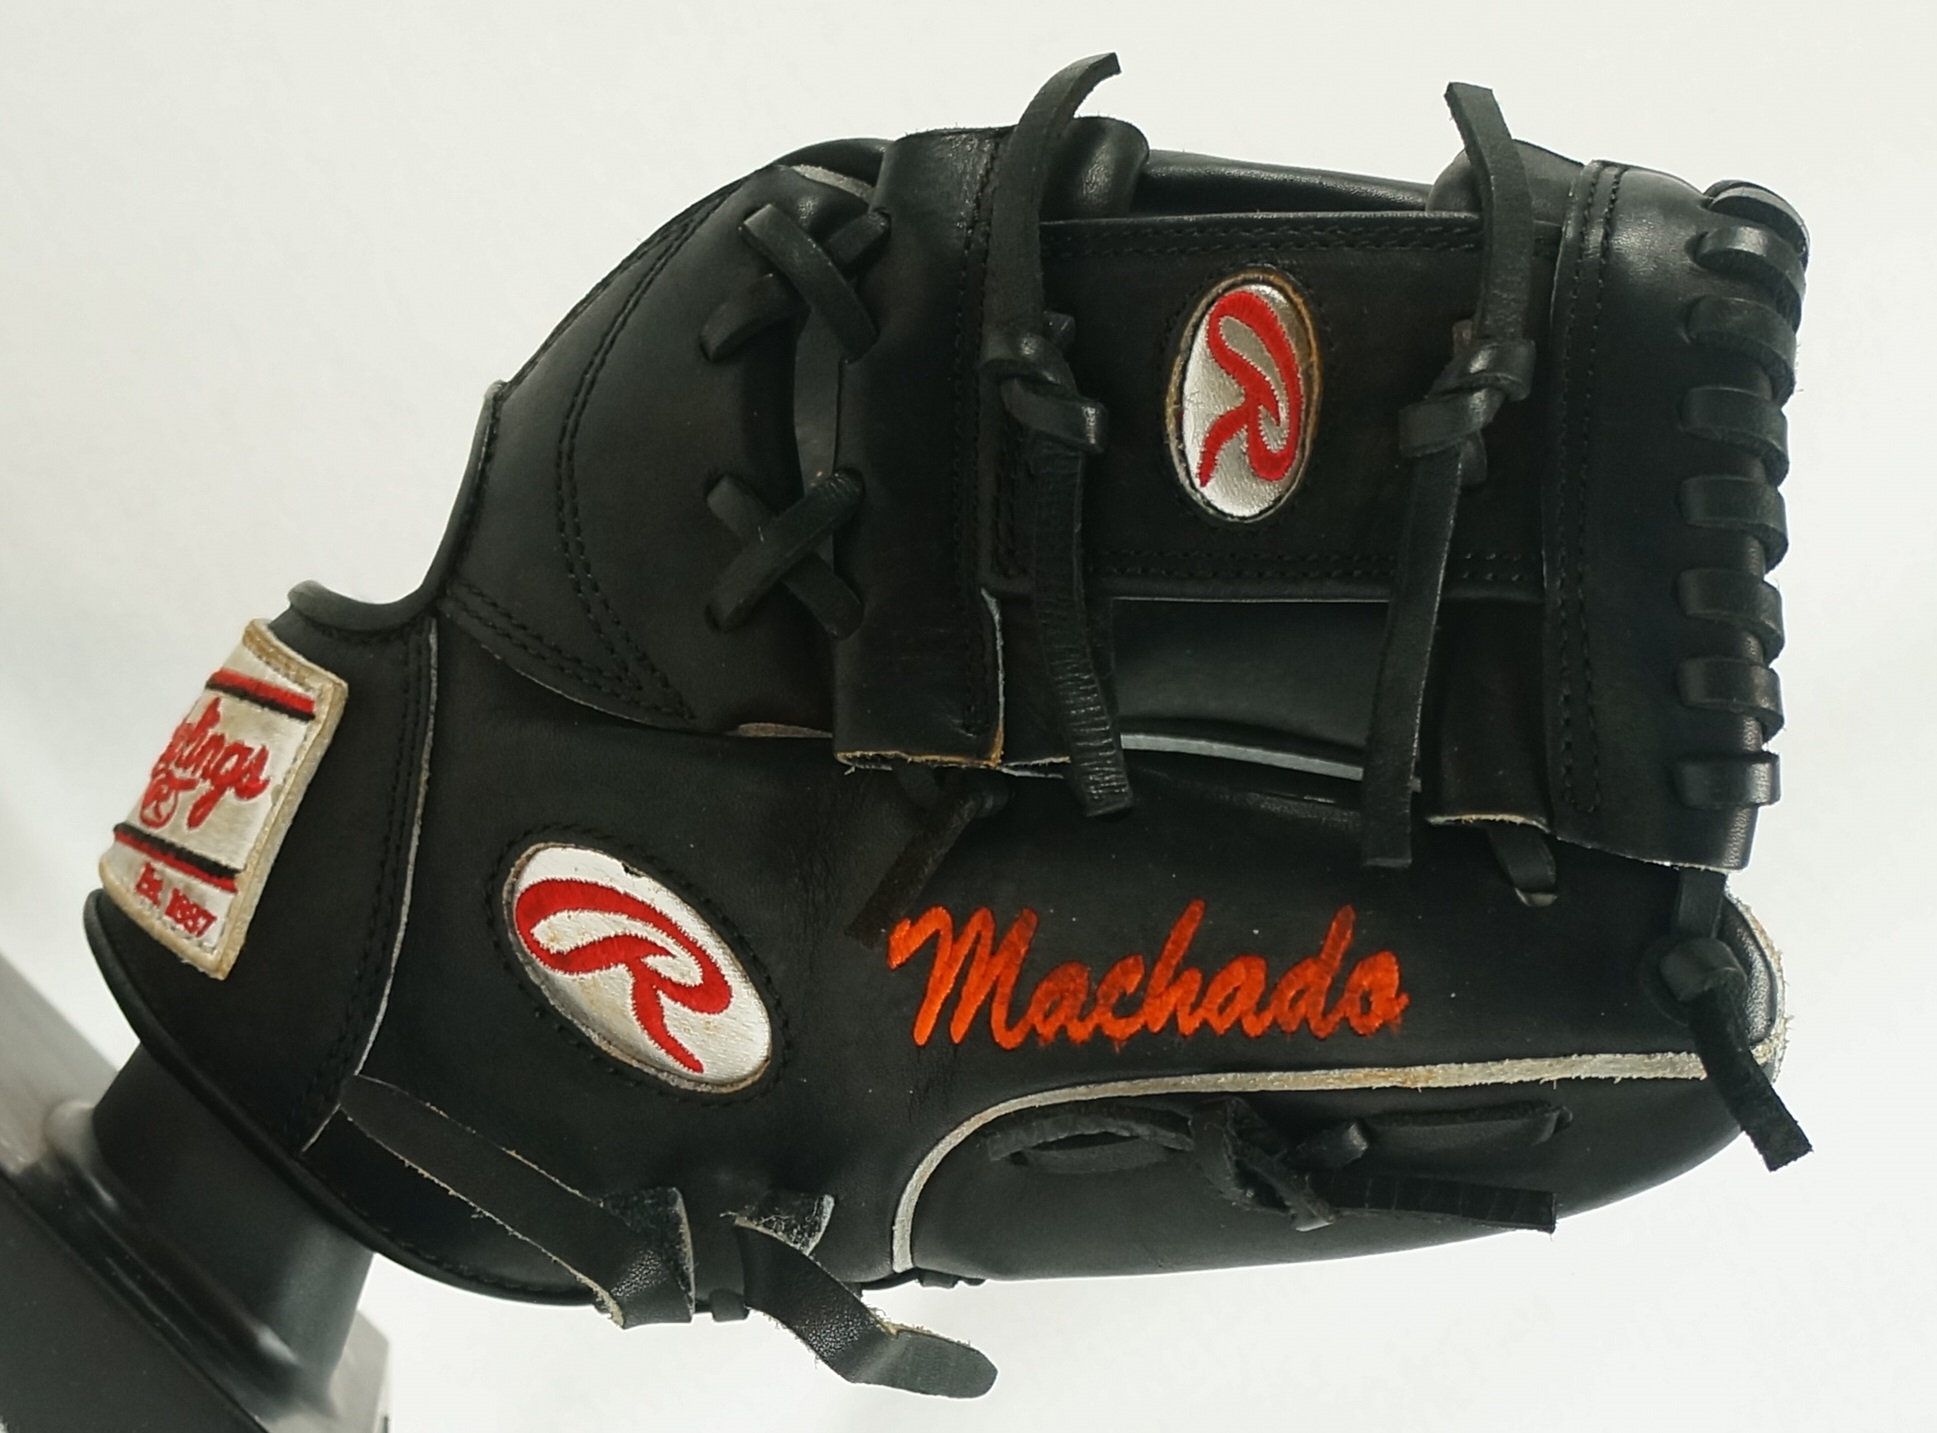 Manny Machado of the Baltimore Orioles wears Nike batting gloves